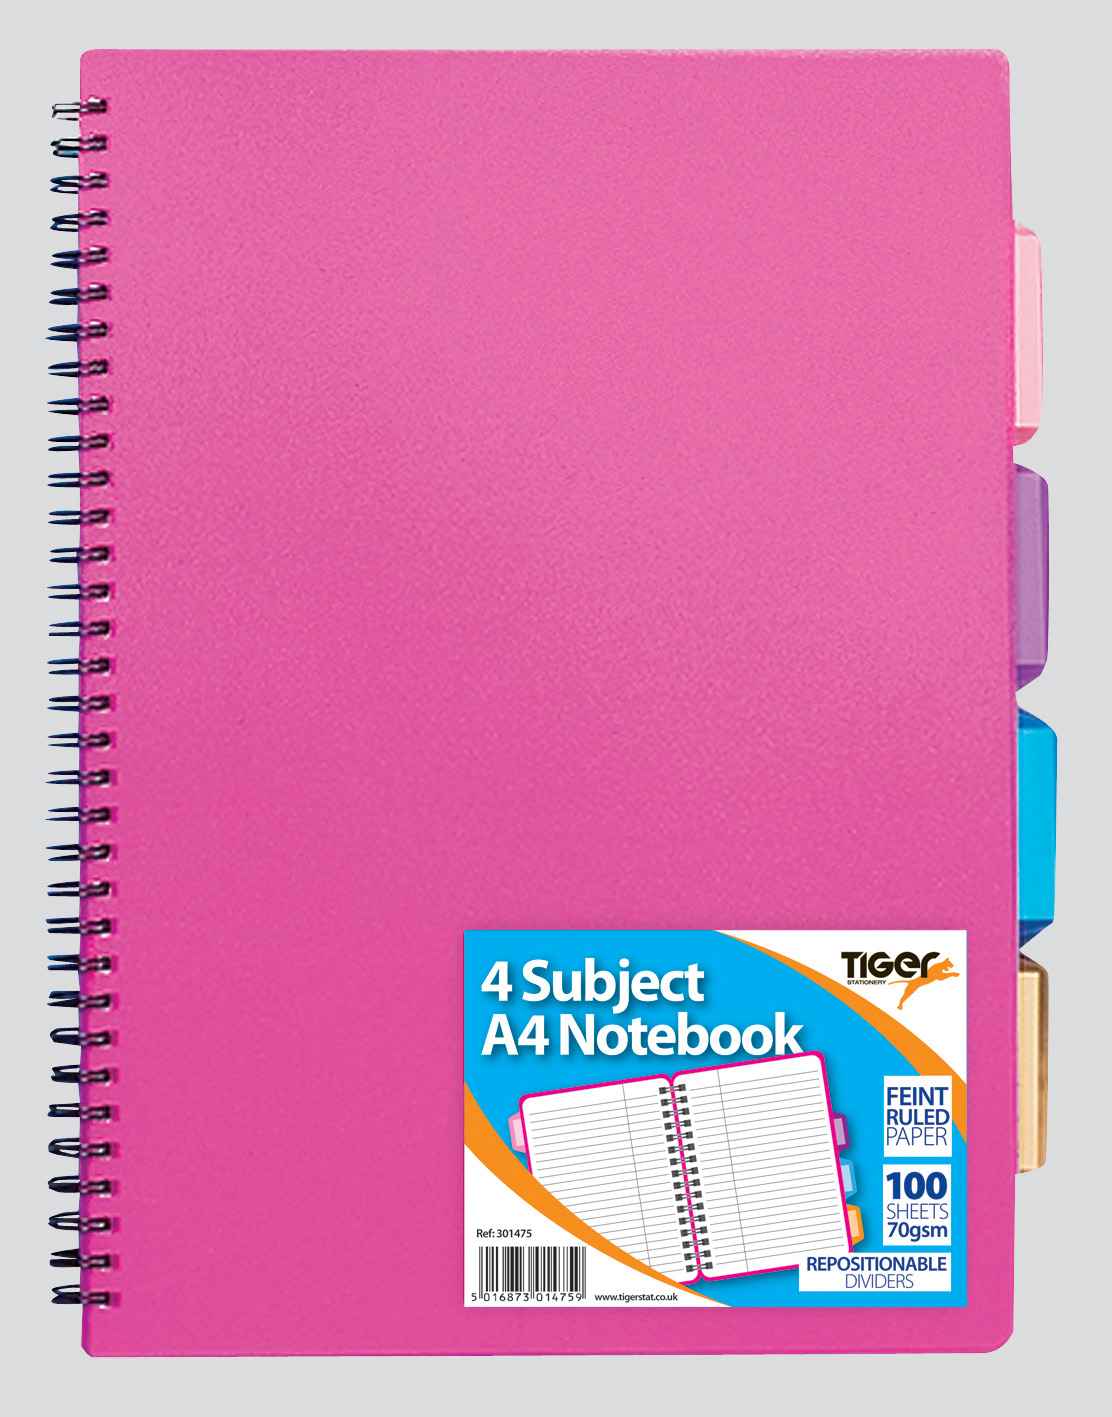 A4 - 4 Subject Notebook 100 Sheets